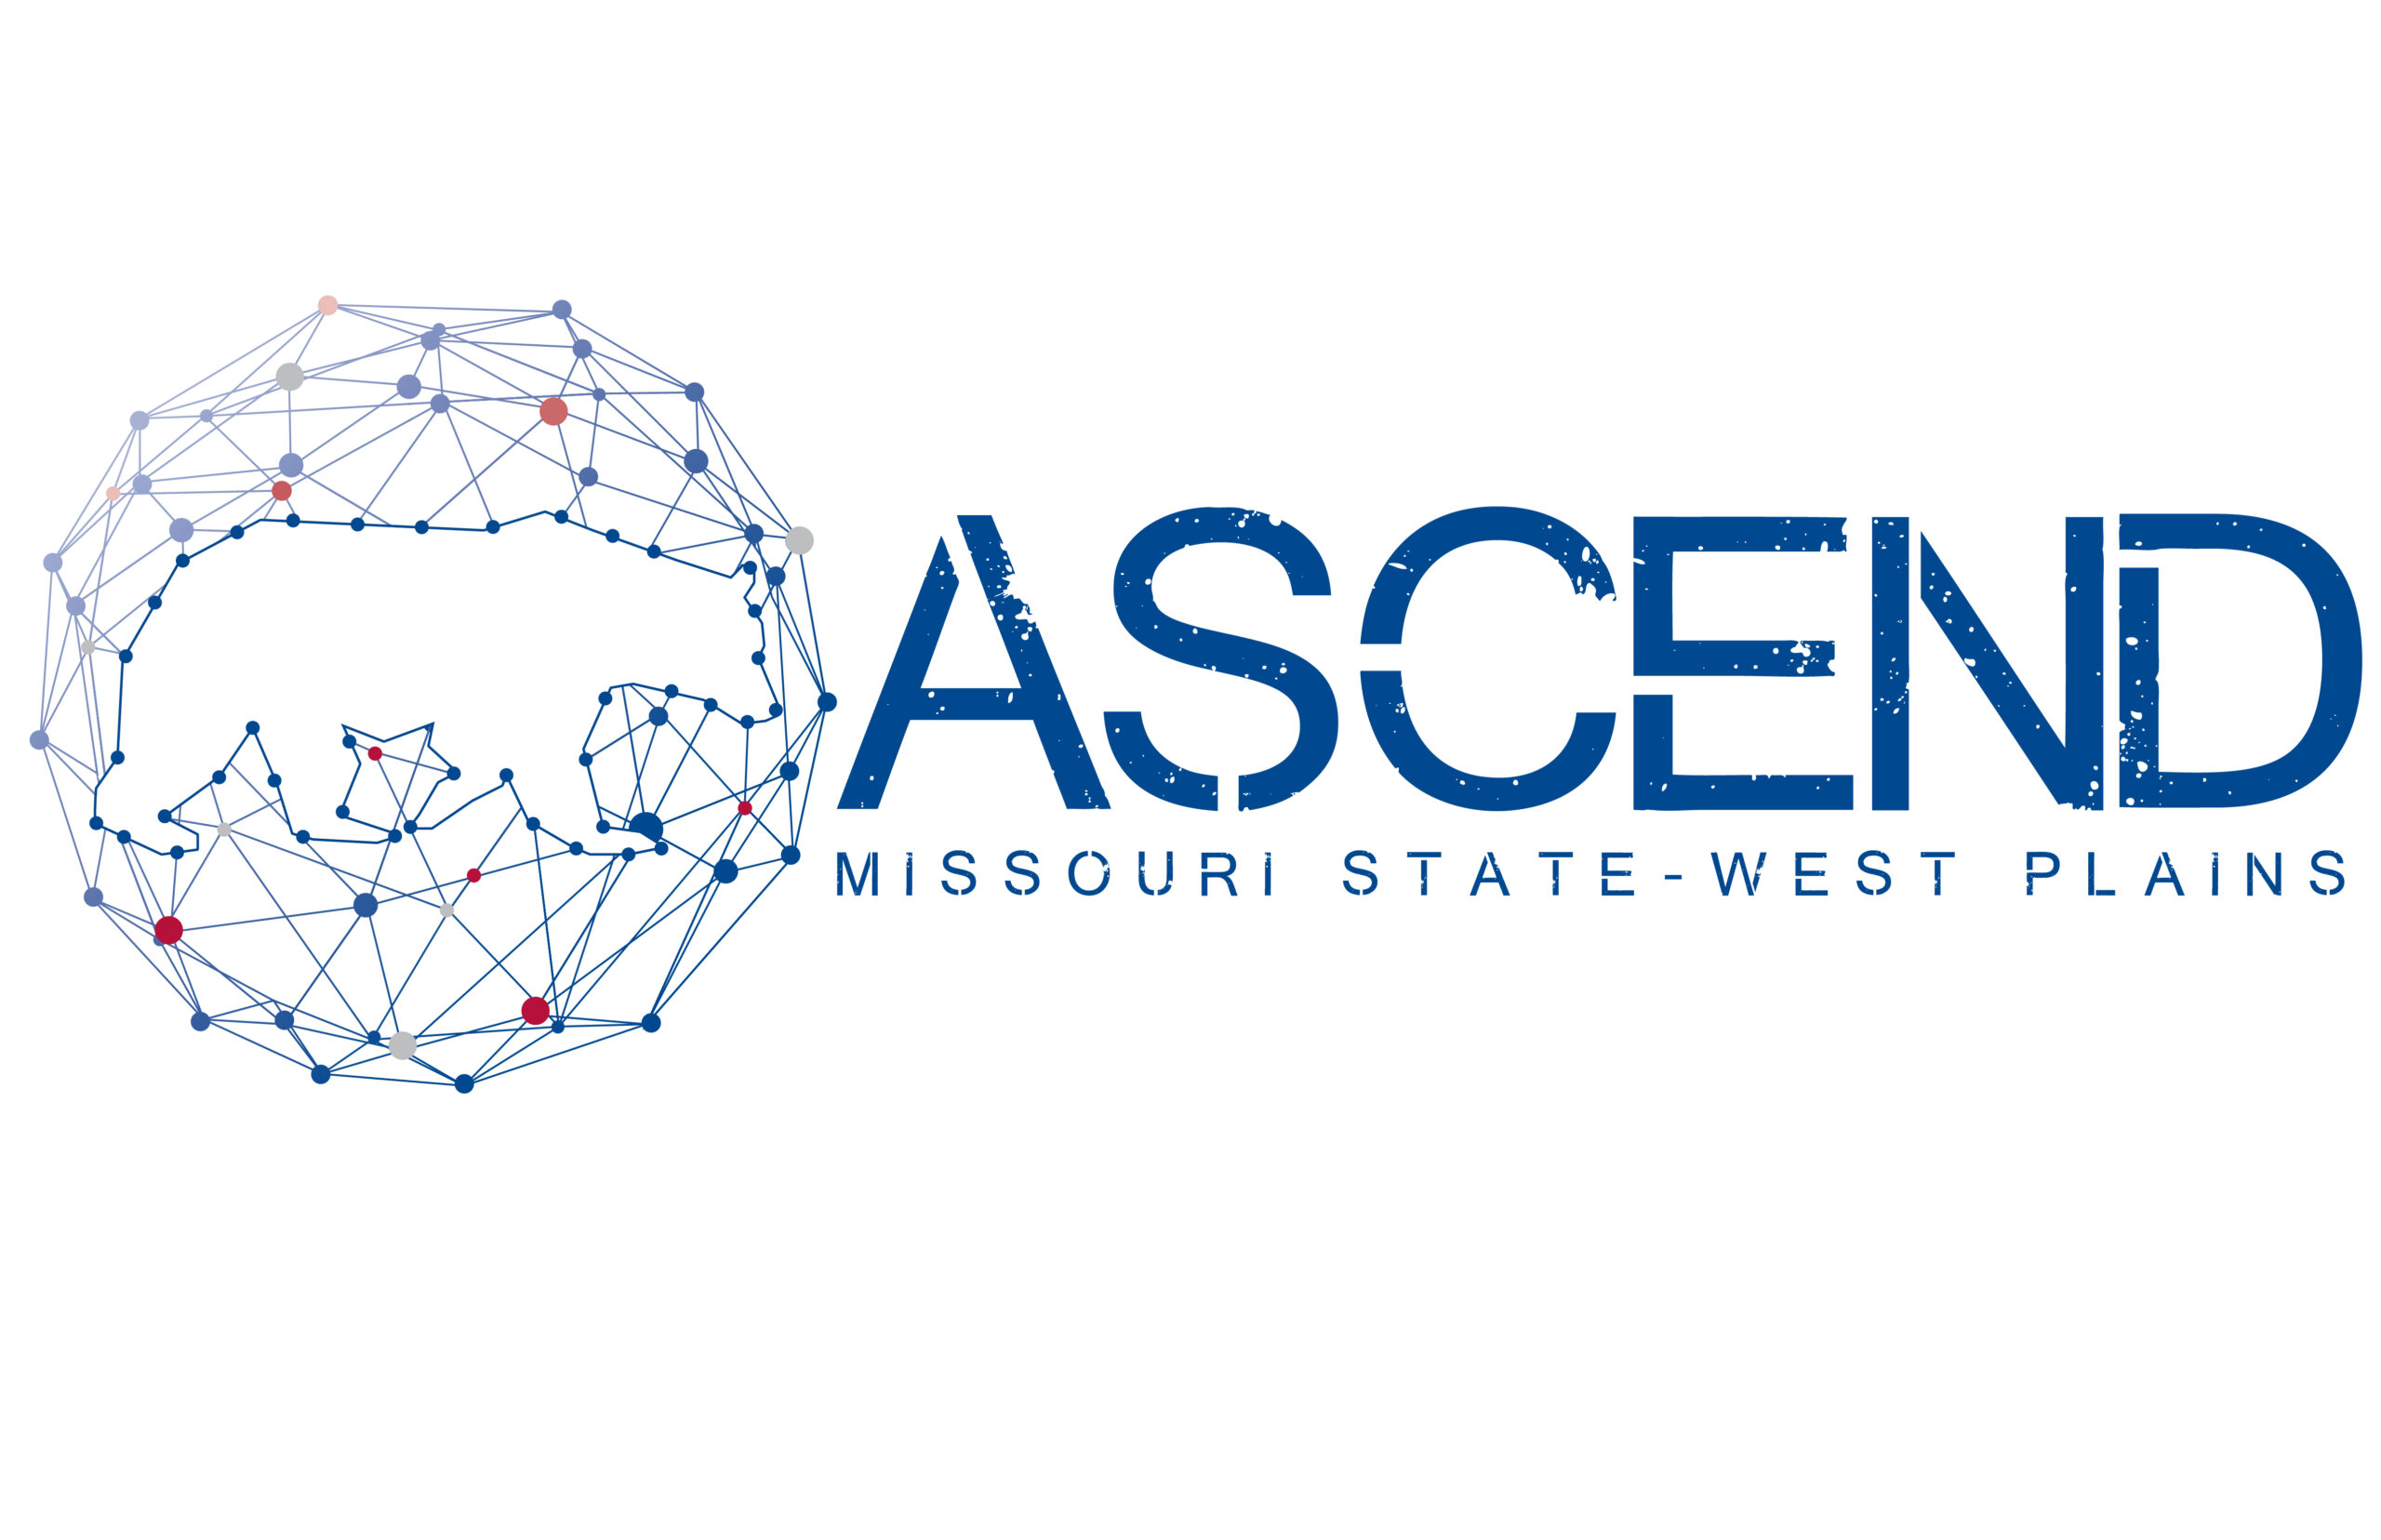 Official logo of the university's Ascend program. Text reads: "ASCEND Missouri State-West Plains" Next to the text is a graphic that creates the outline of a bear.